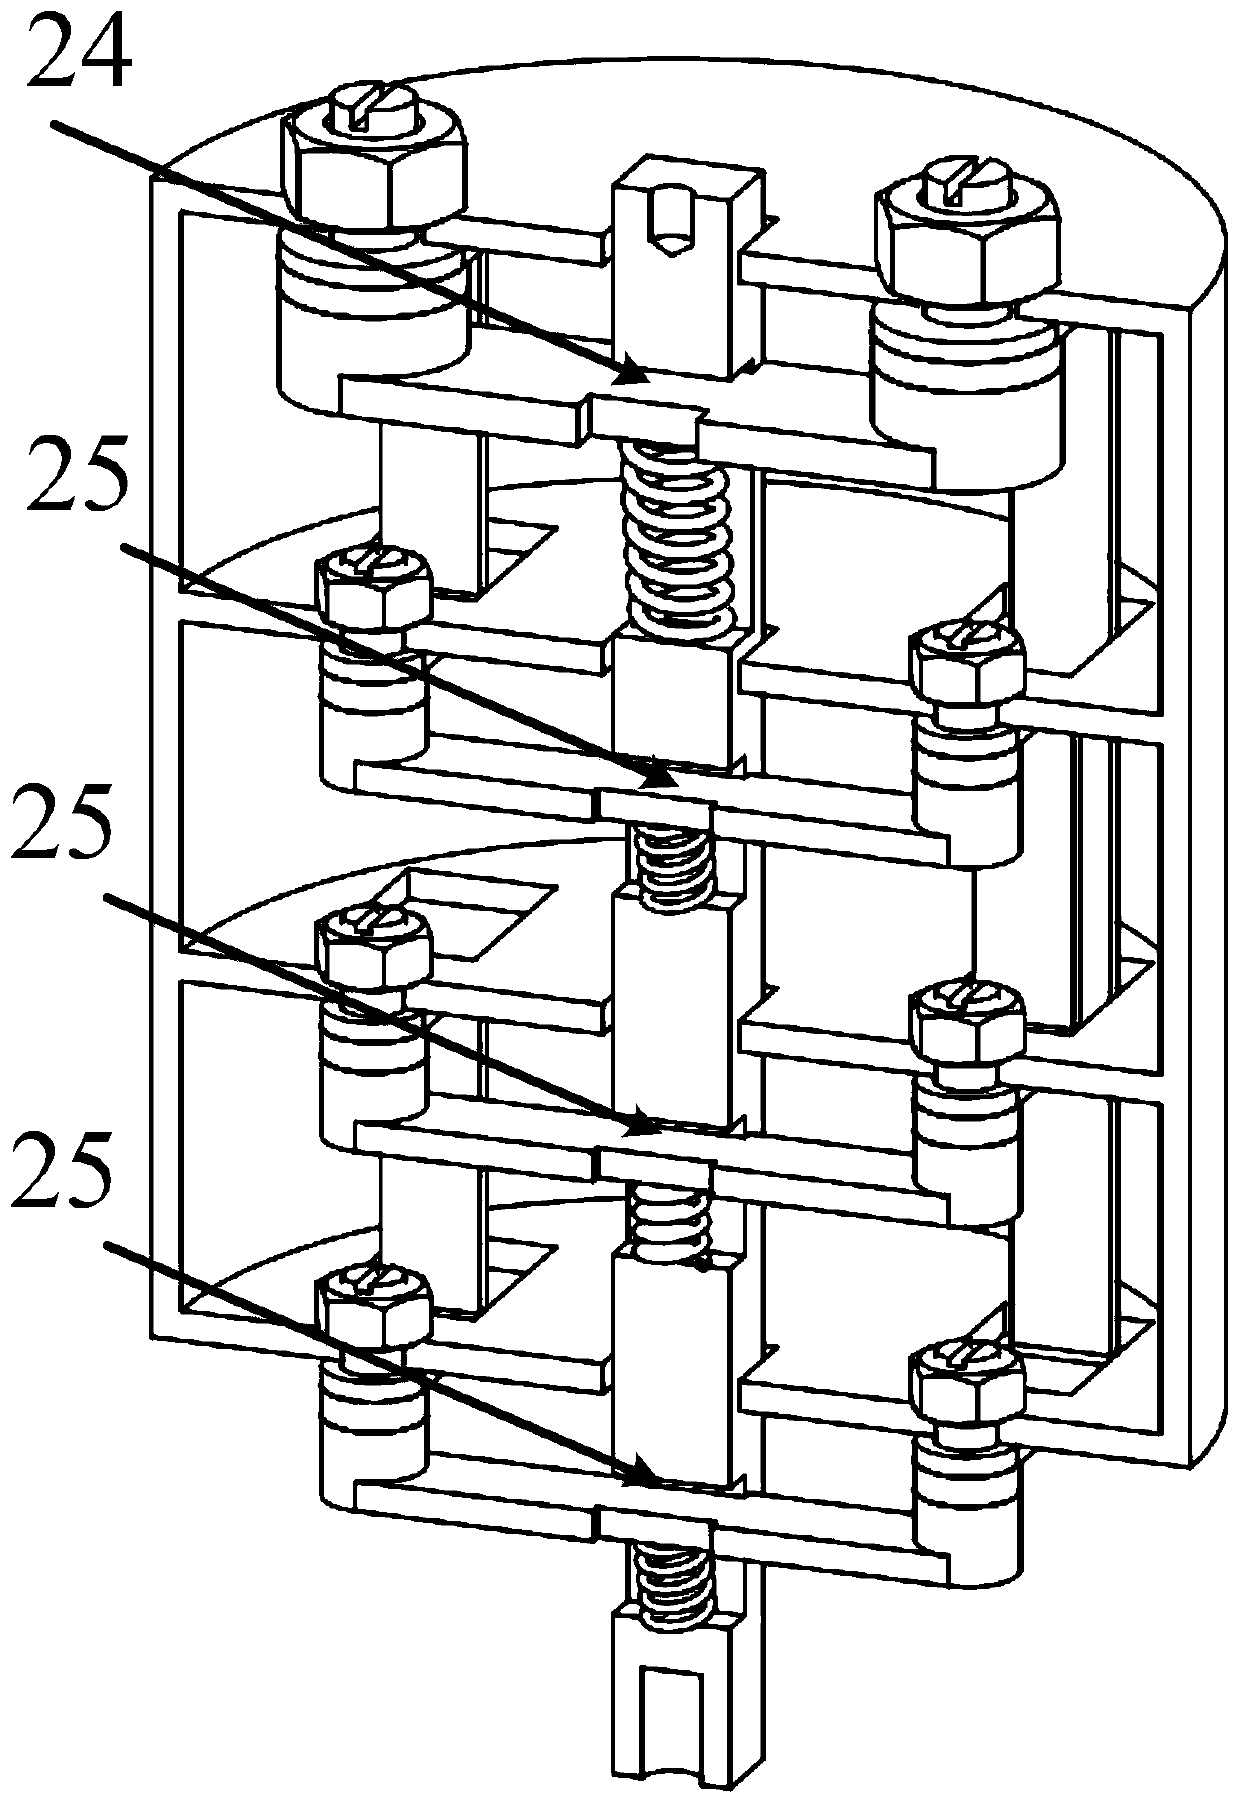 A contact structure of a commutation-type high-voltage DC contactor